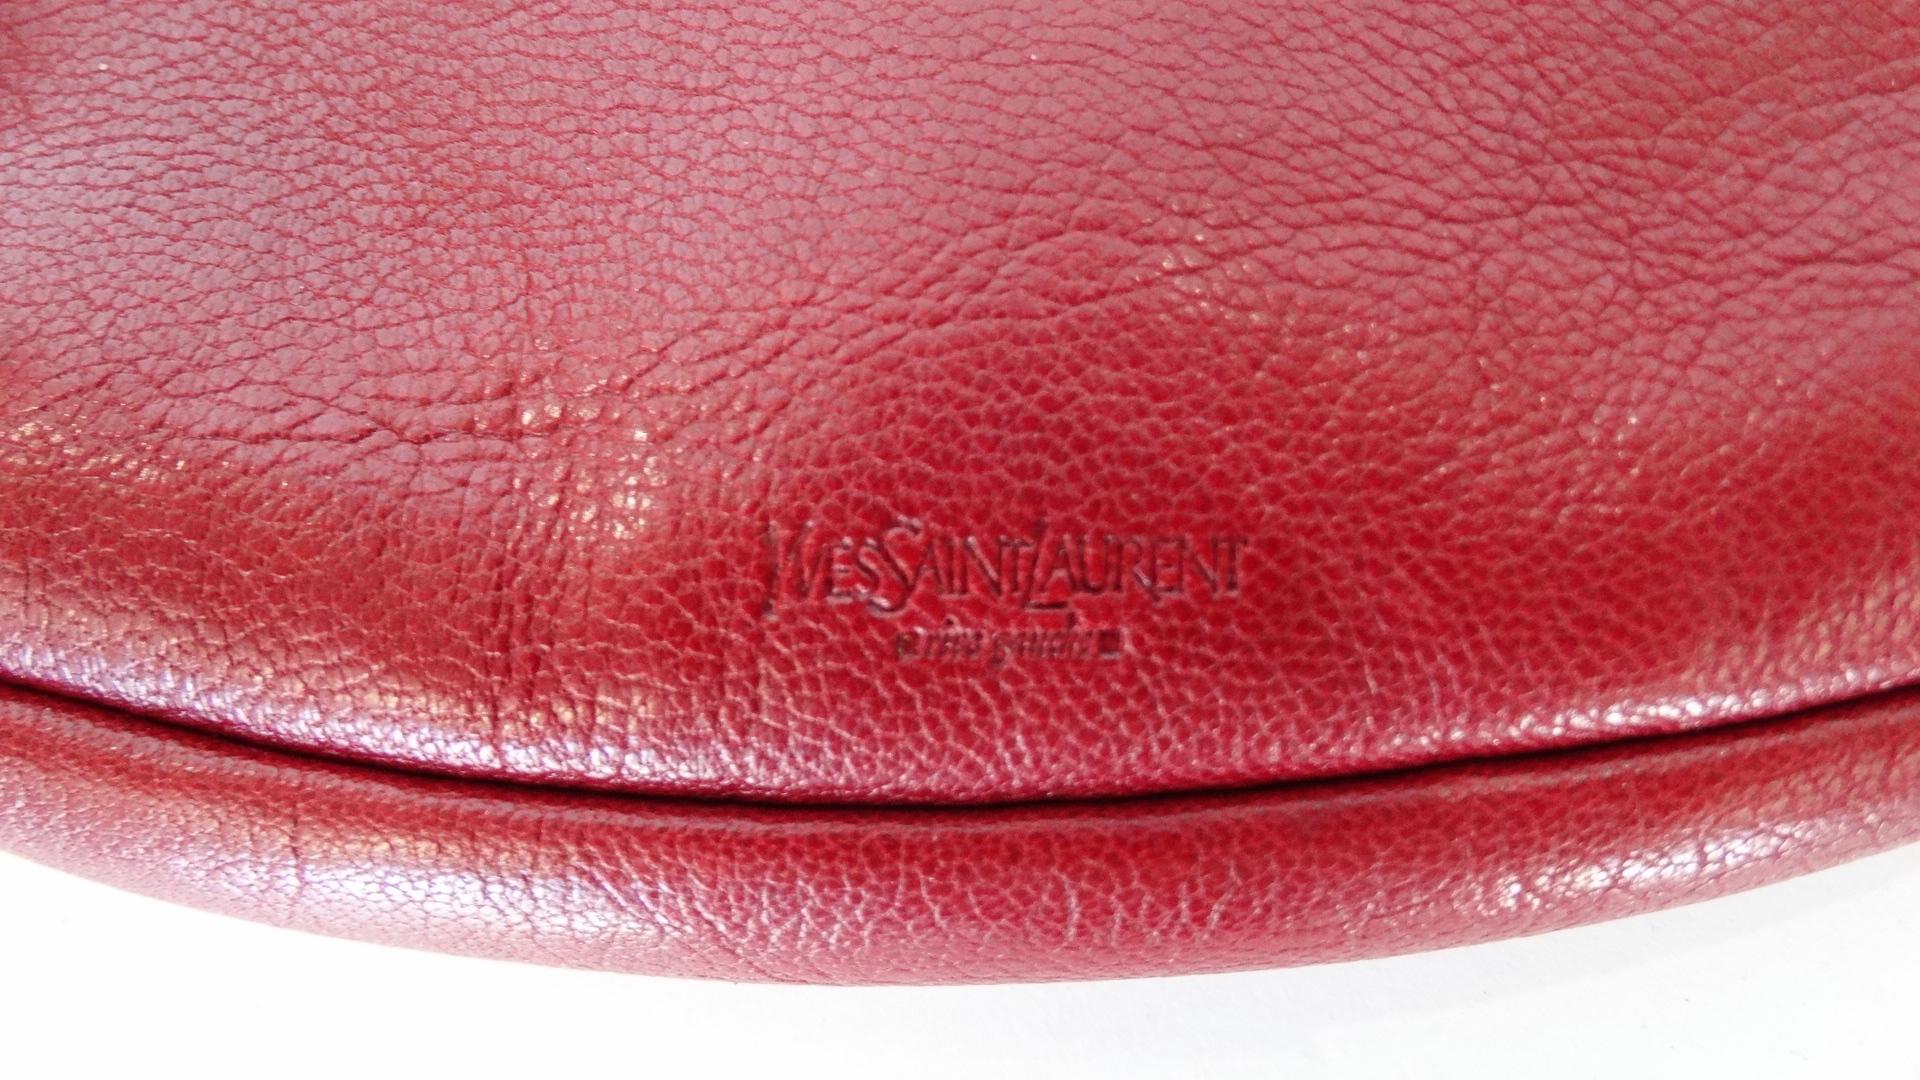 Show Your Love For YSL With This Adorable Pouch! This lips pouch is made of red pebble grain leather with a red top zipper. Interior is fully lined and tagged YSL. Use this as a wallet, to store your lipstick or for travel! Made in Italy with serial